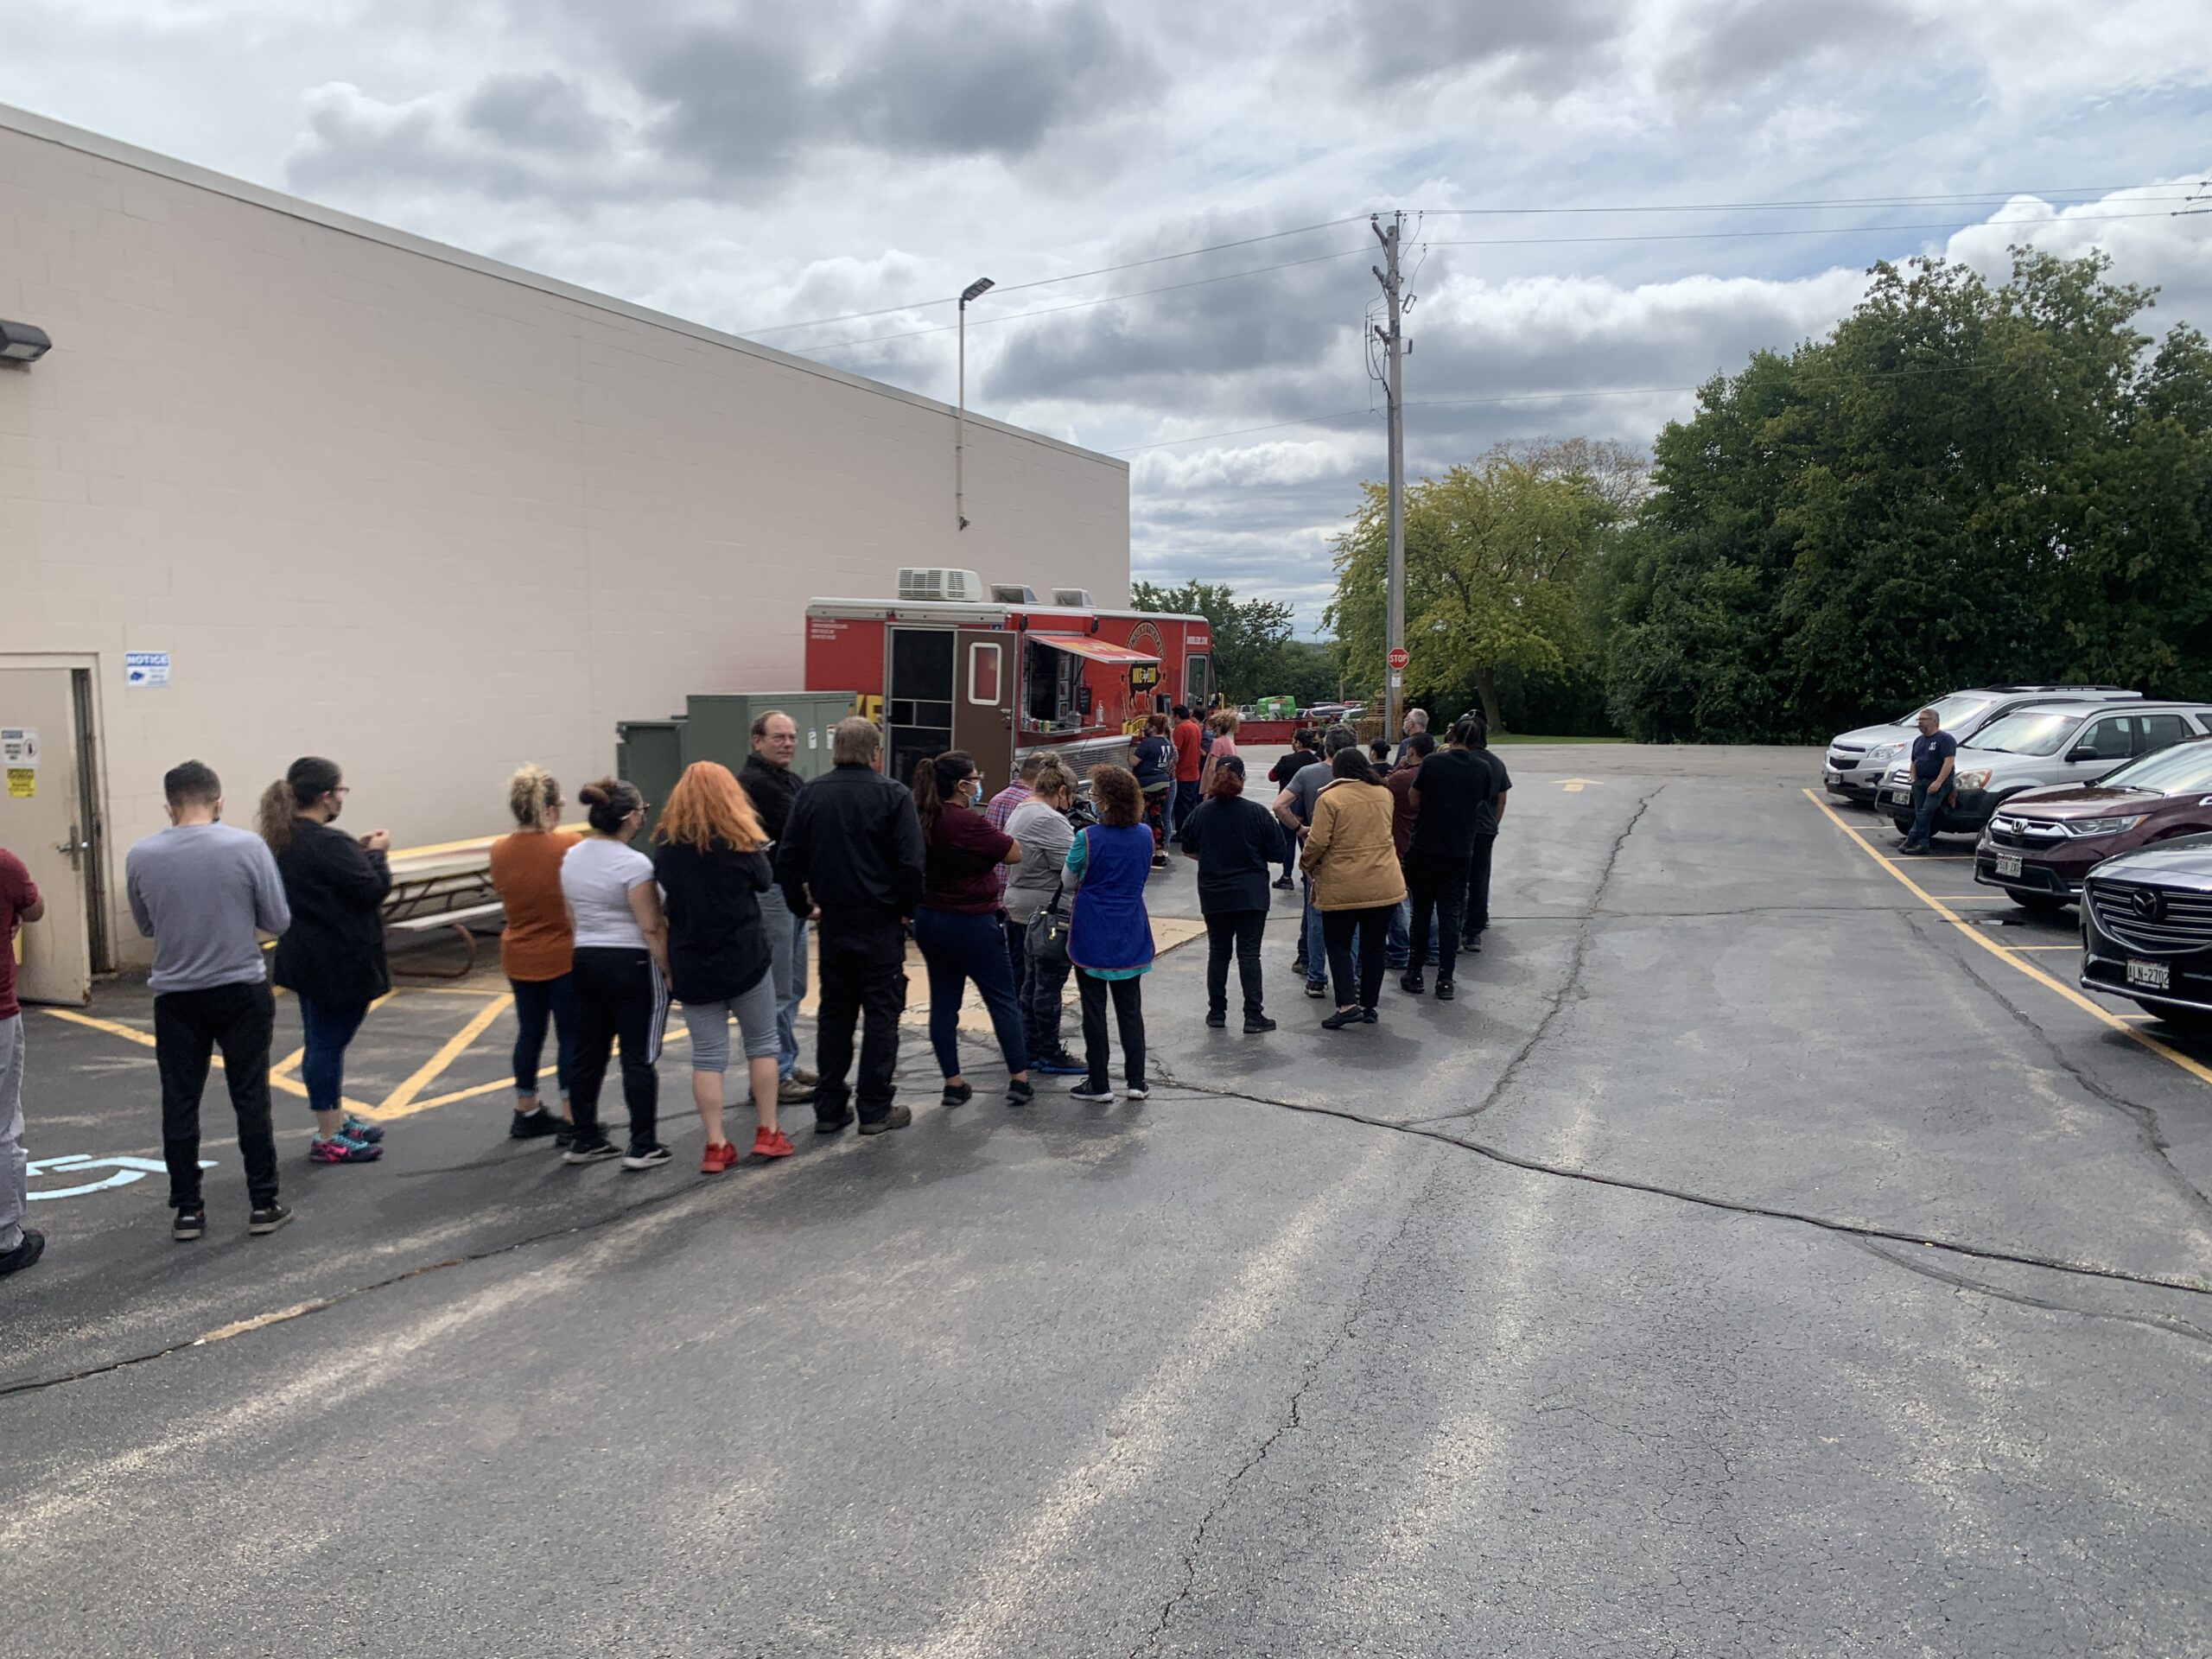 Winco employees getting lunch at a food truck